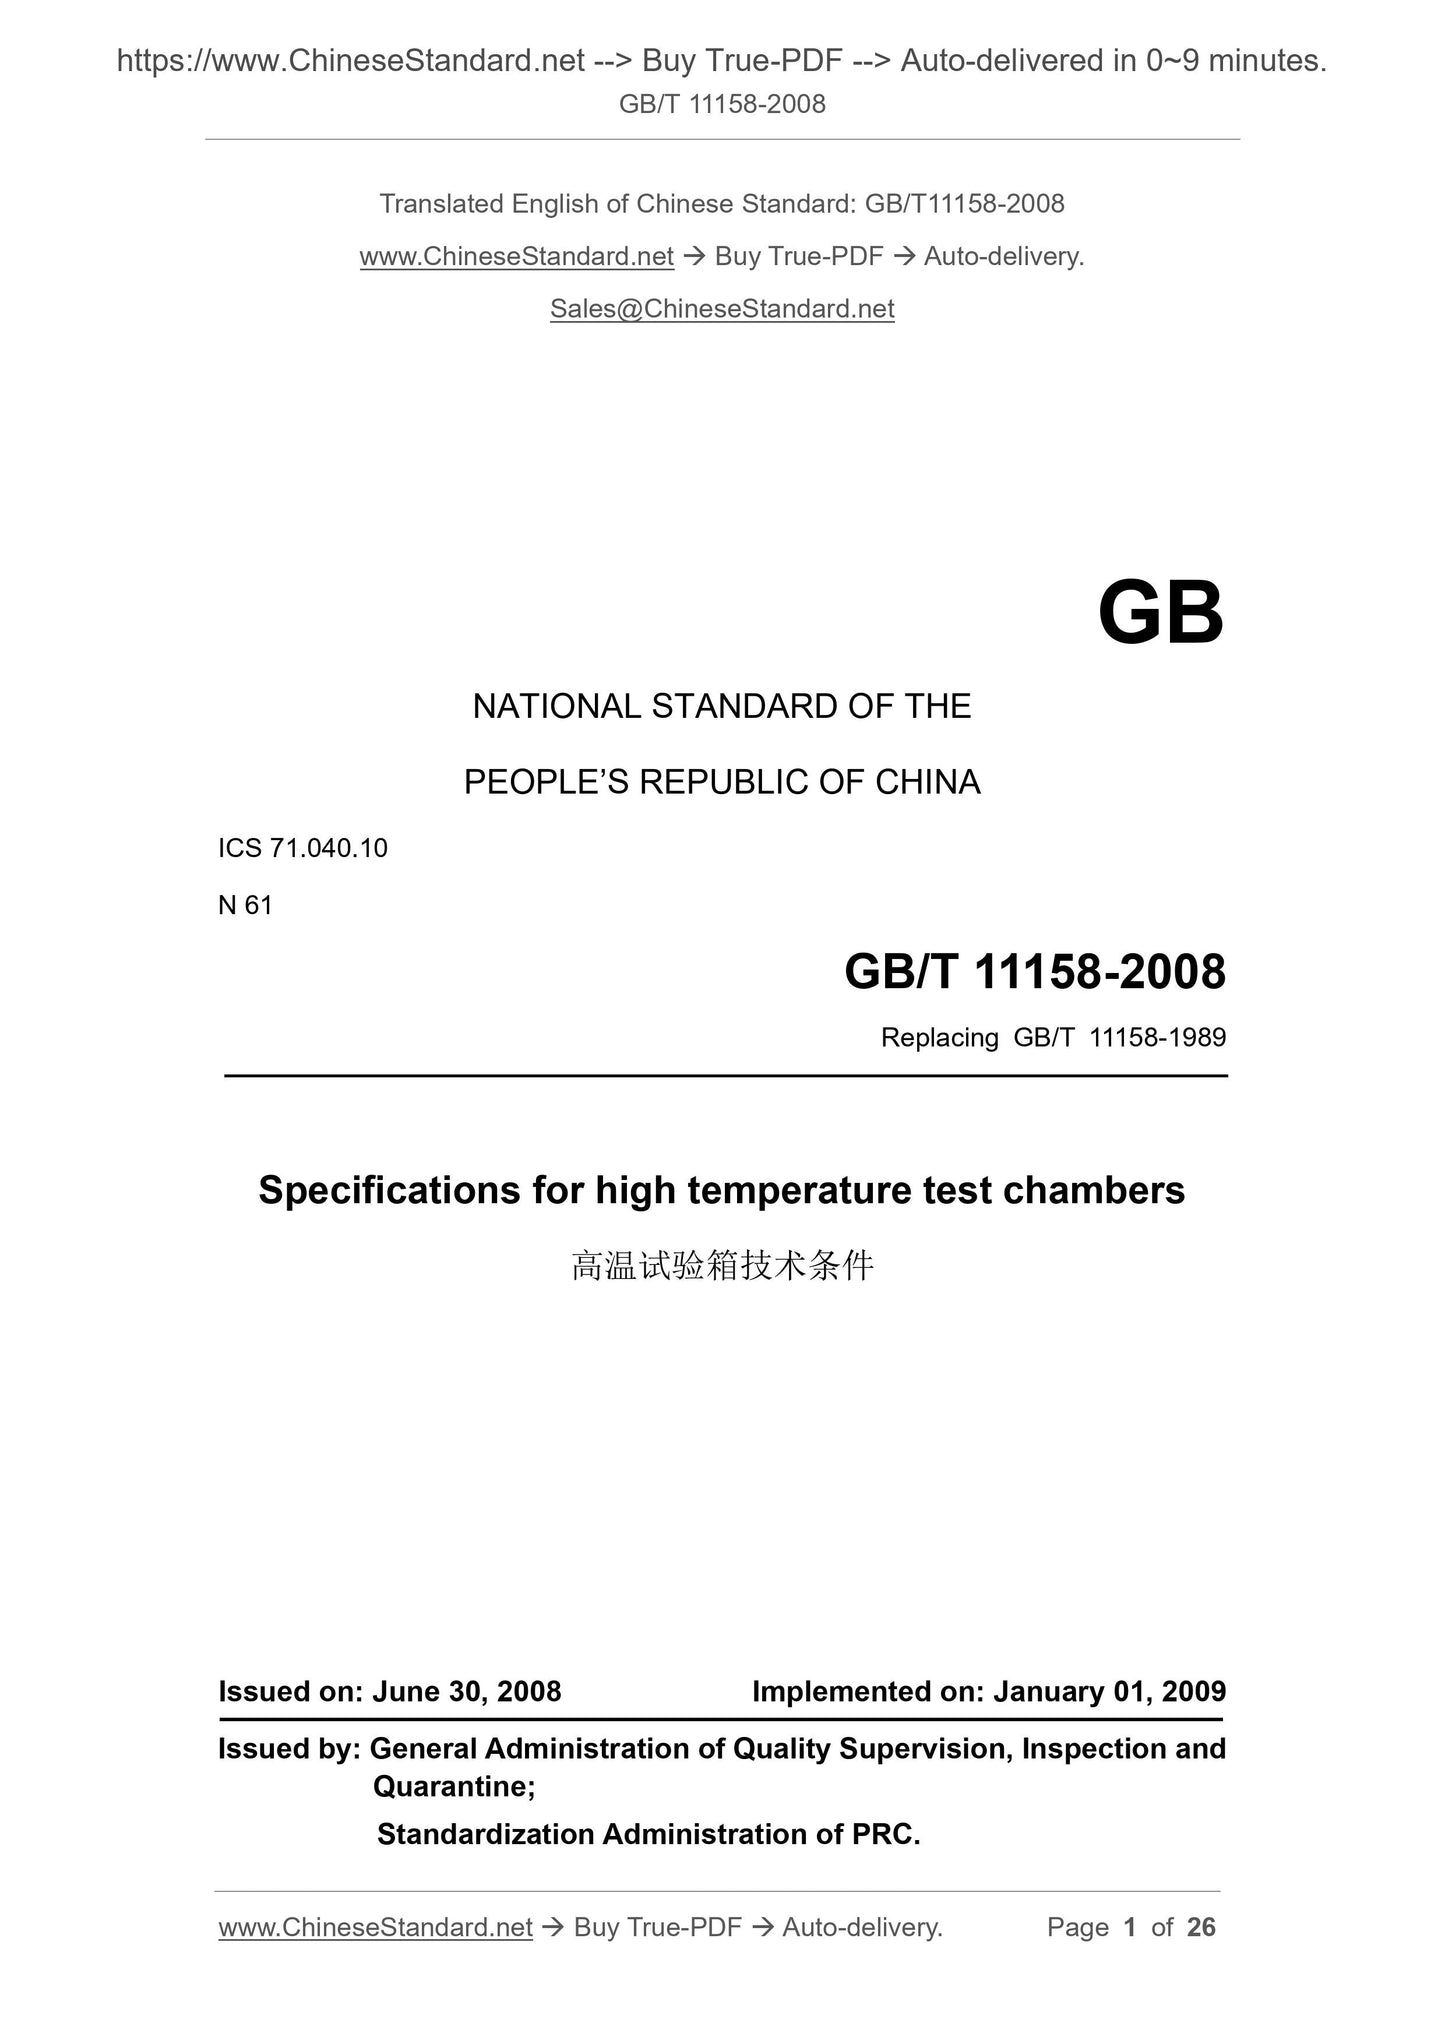 GB/T 11158-2008 Page 1